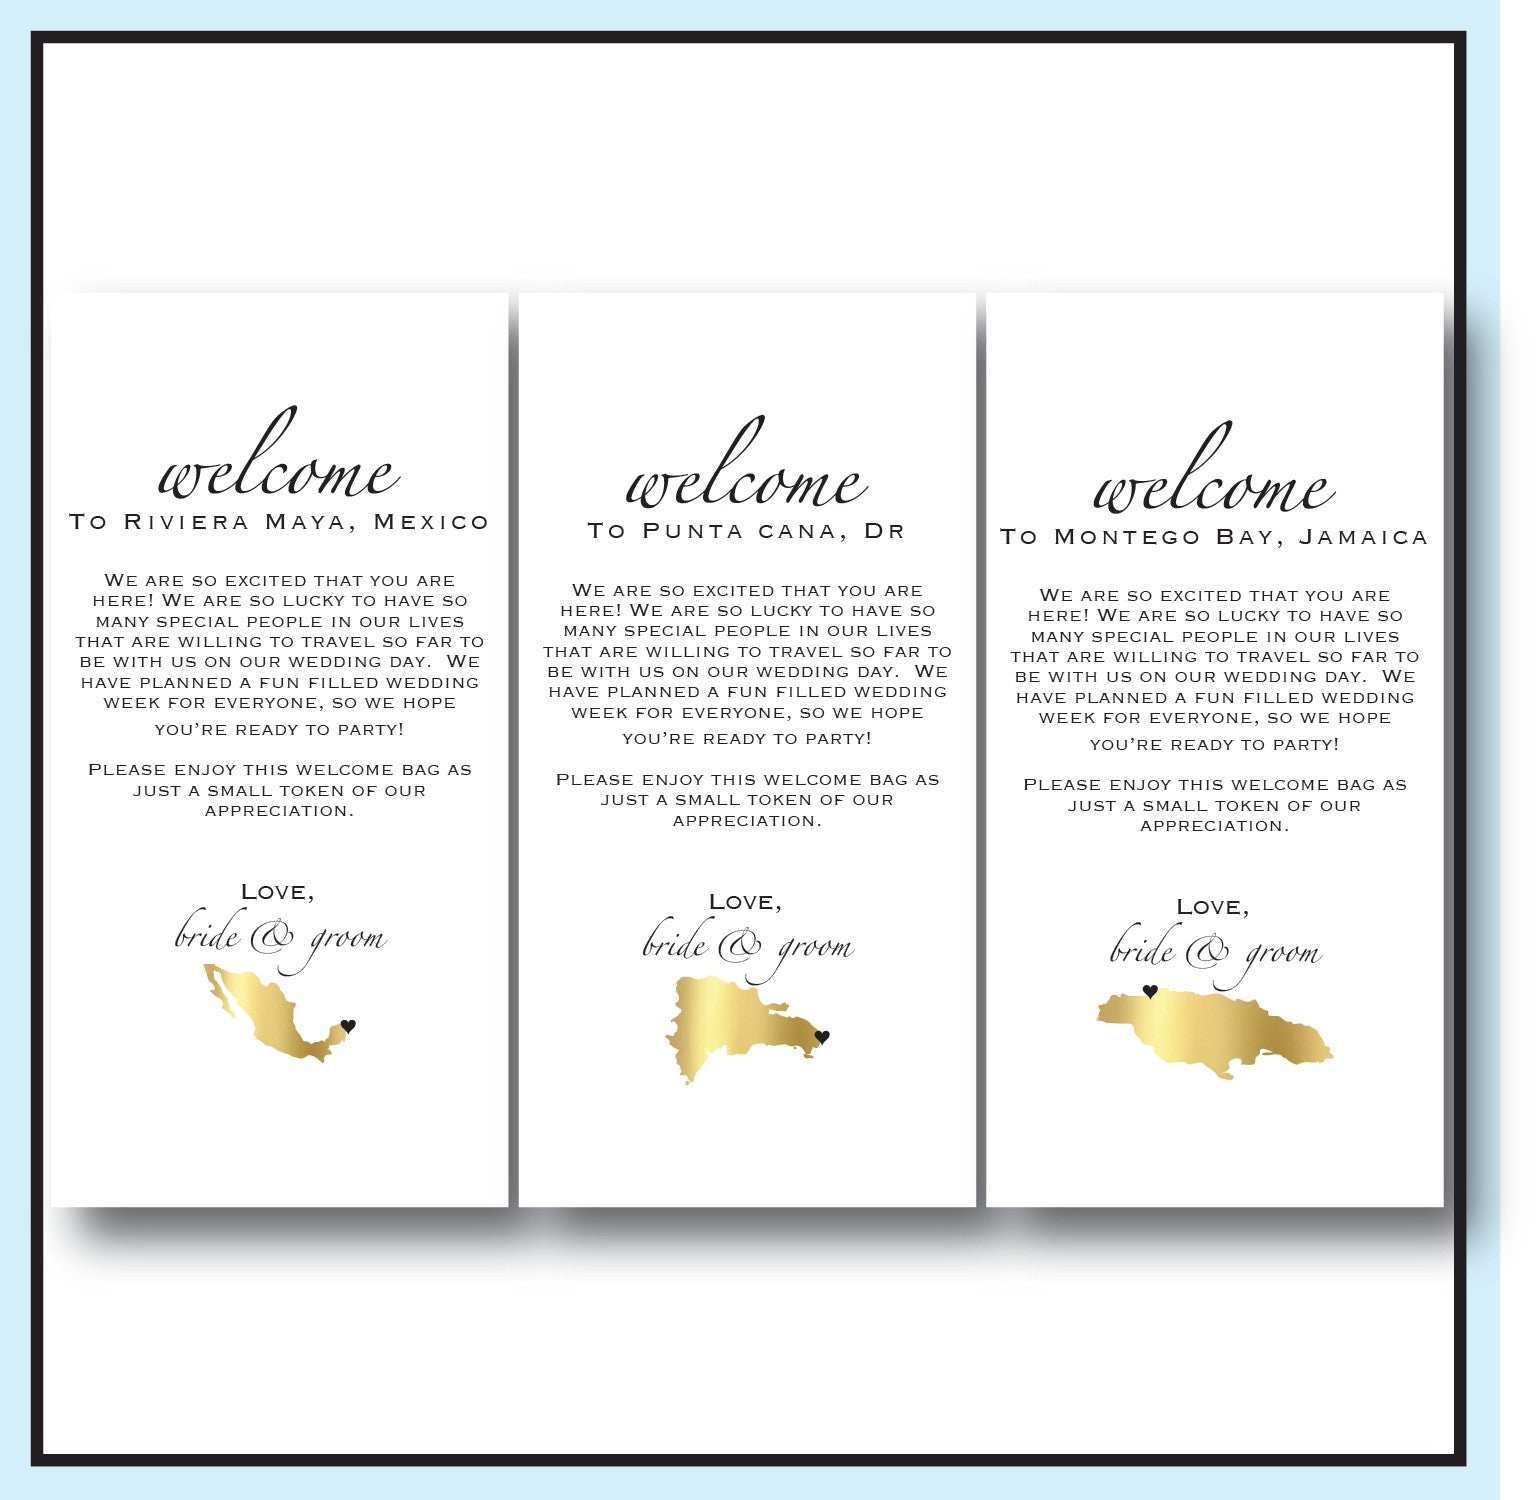 Destination Wedding Welcome Letter with Map